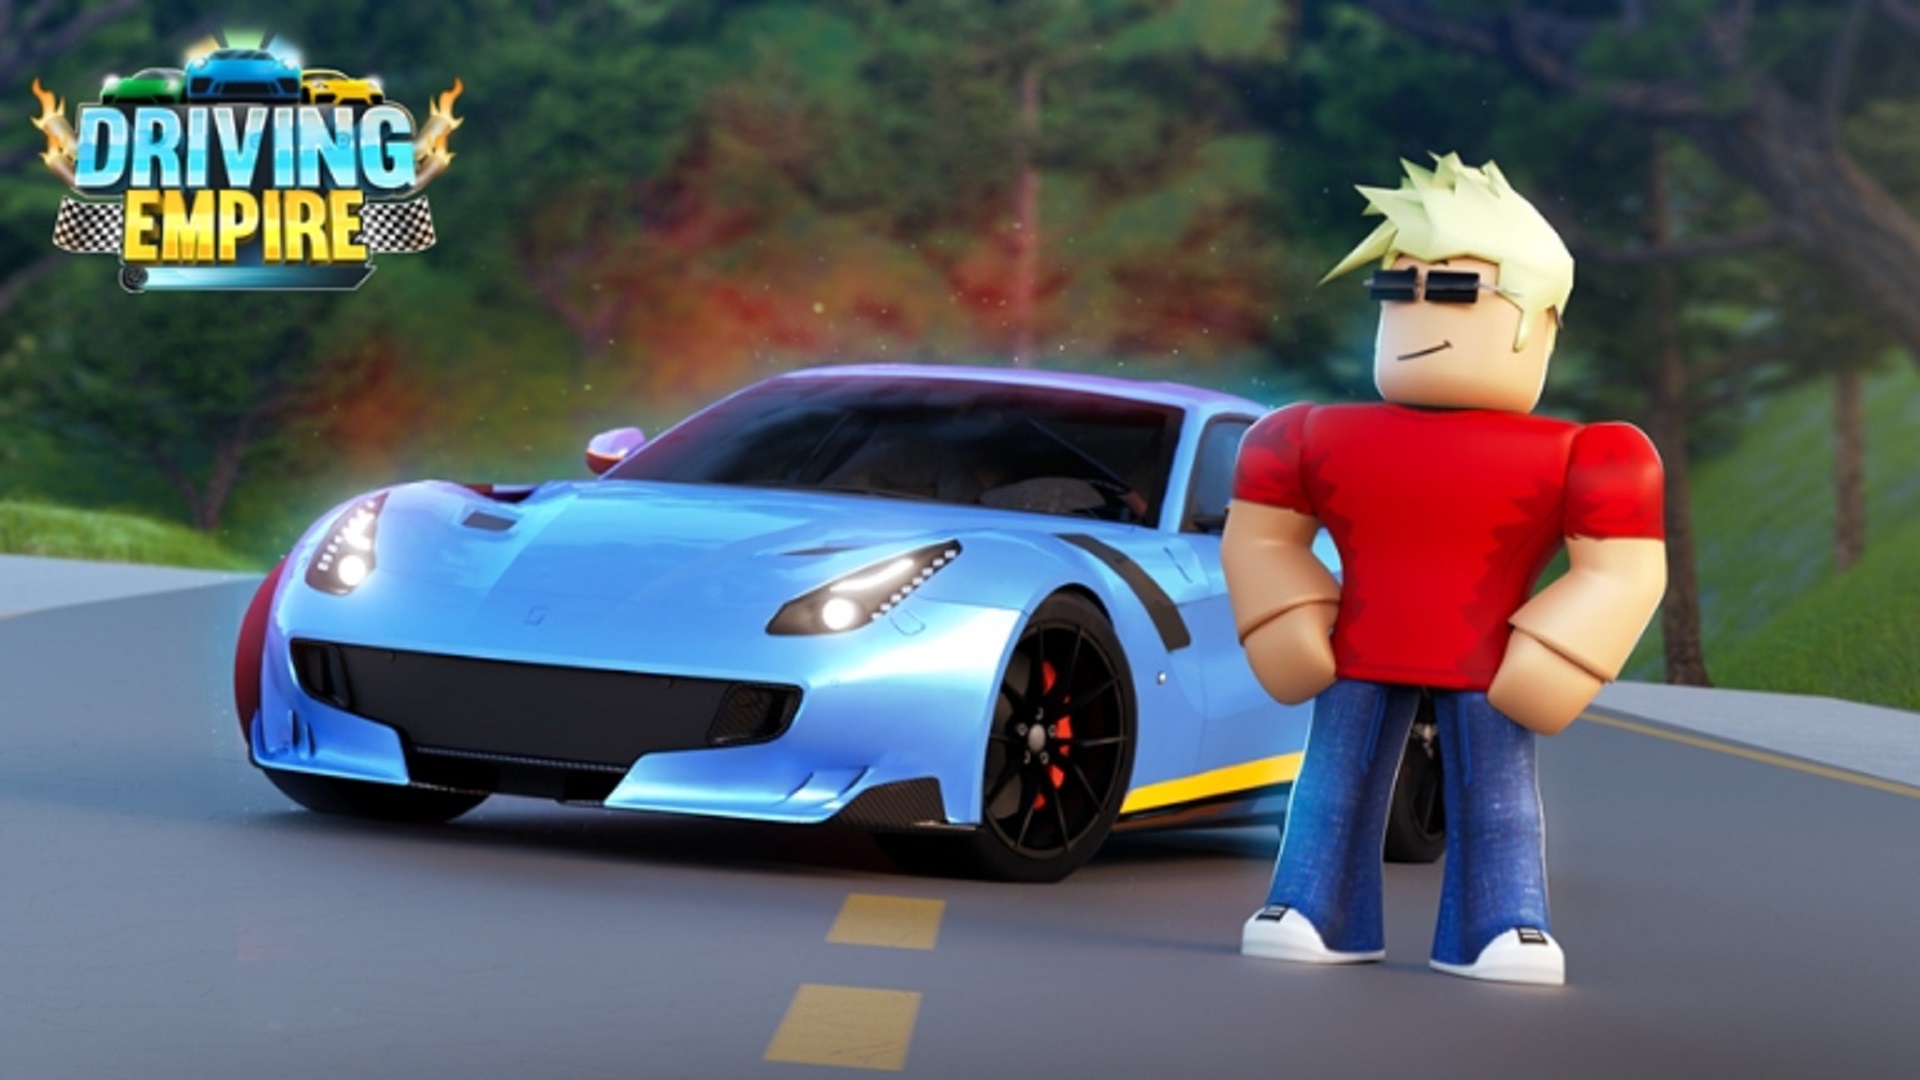 Driving Empire Codes Free Wraps And Cash Pocket Tactics - masters of roblox codes for ultimate driving